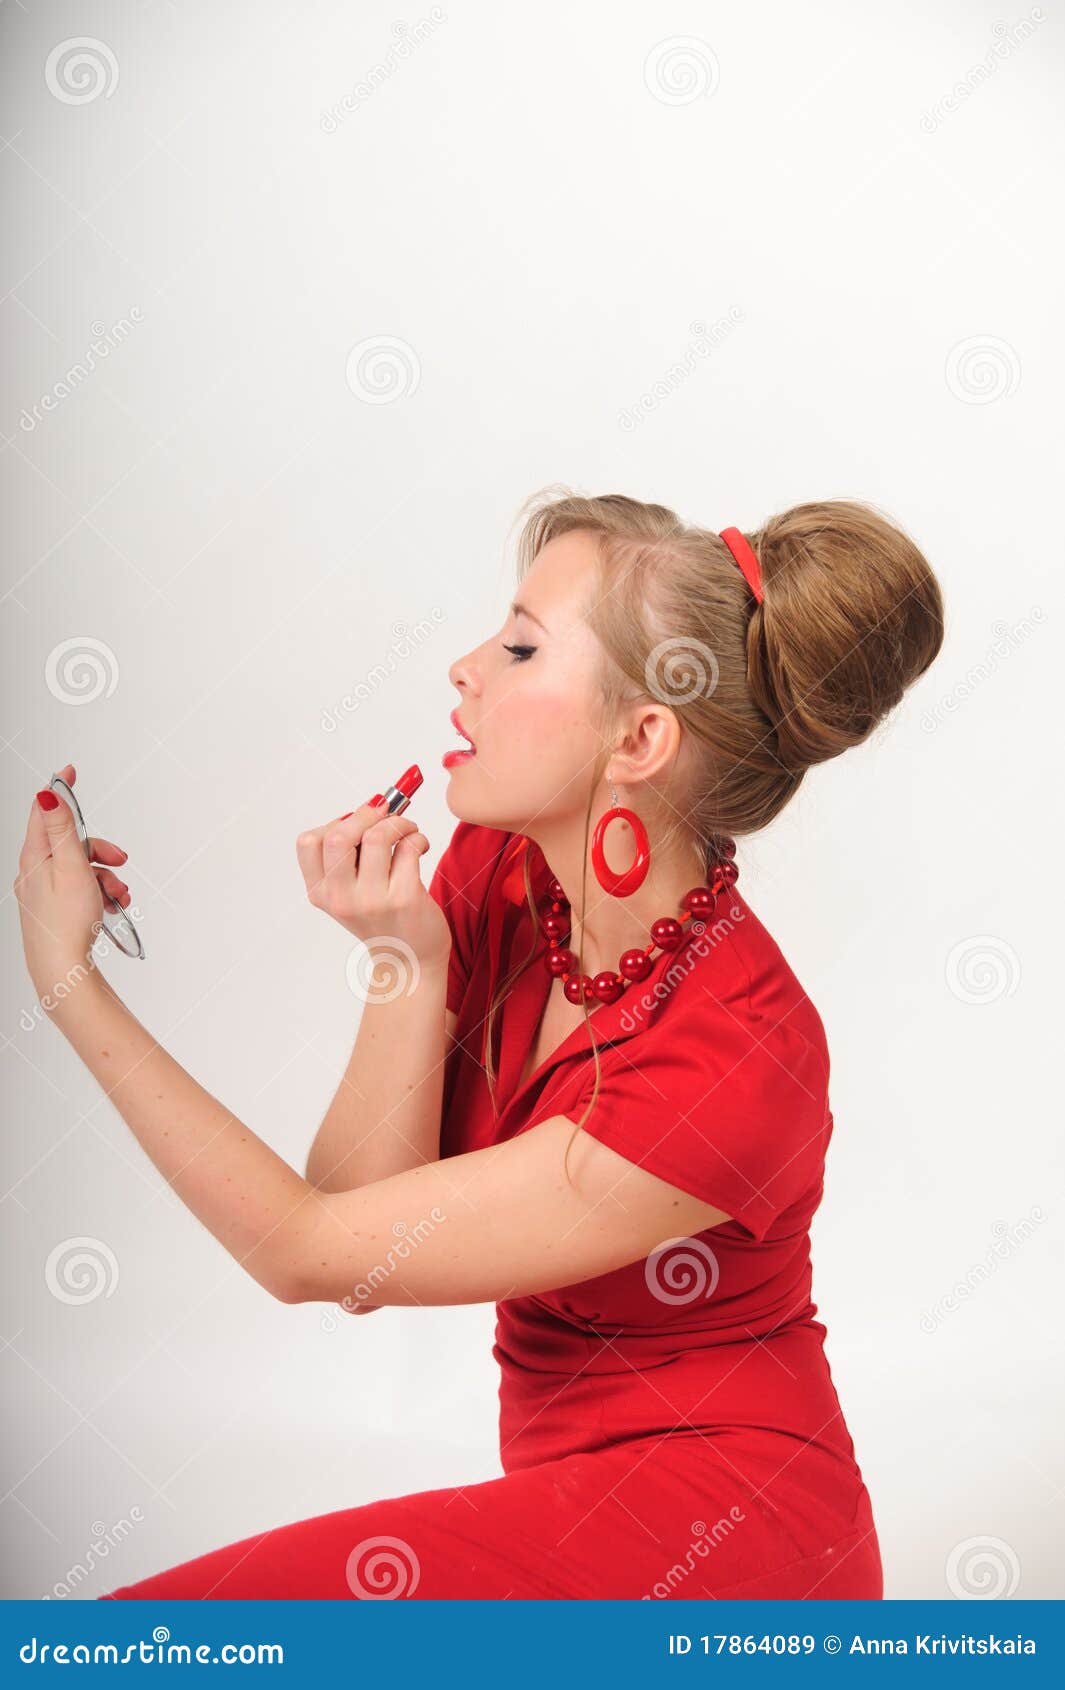 Pin Up Girl Lipstick Royalty Free Stock Images Image 17864089